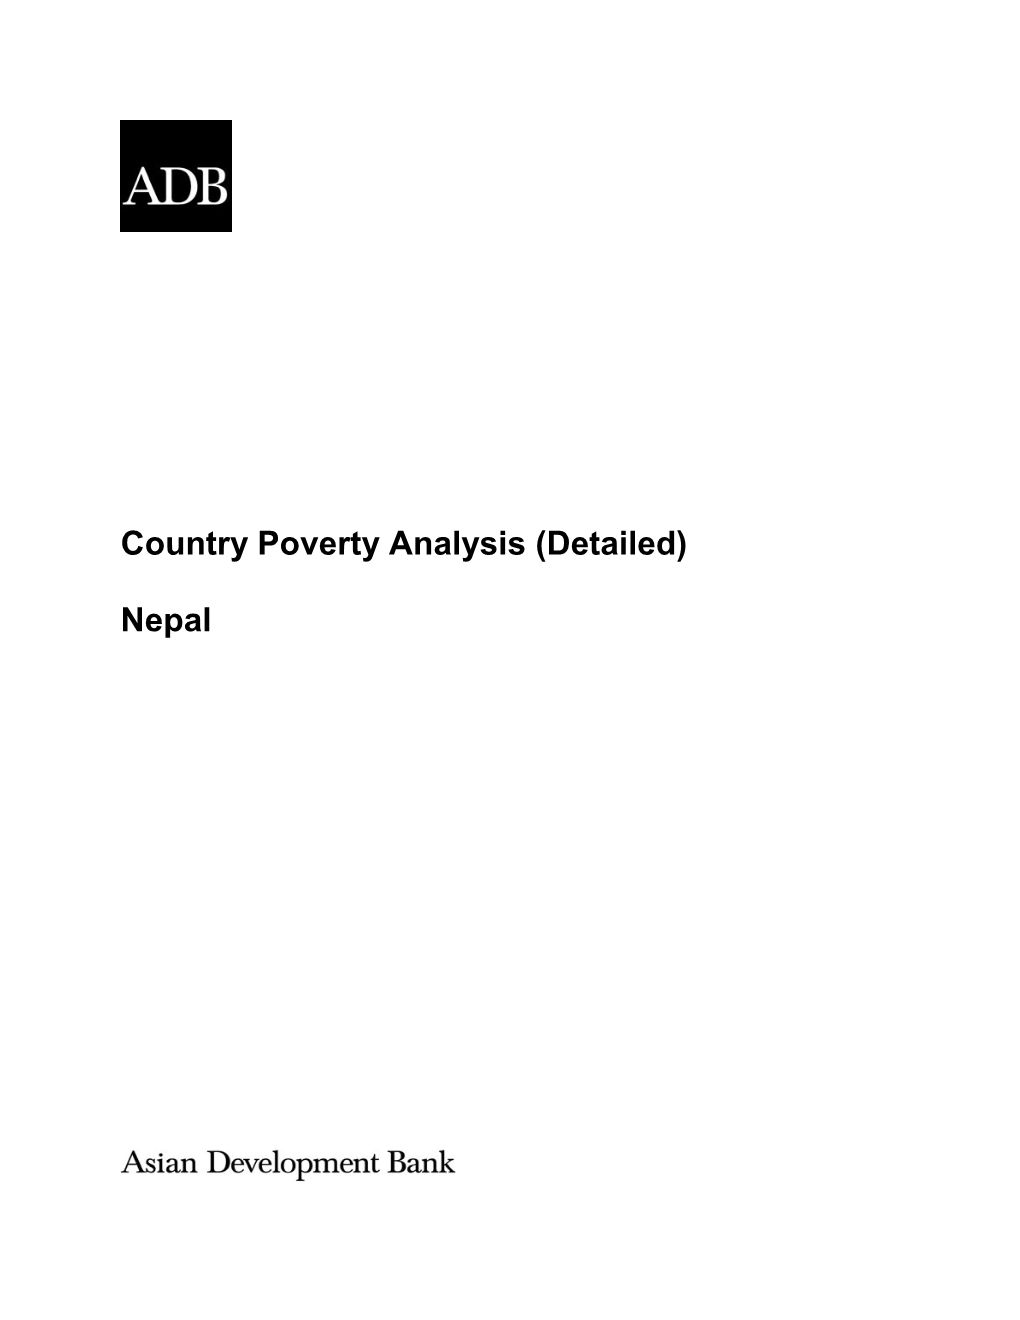 Country Poverty Analysis (Detailed) Nepal